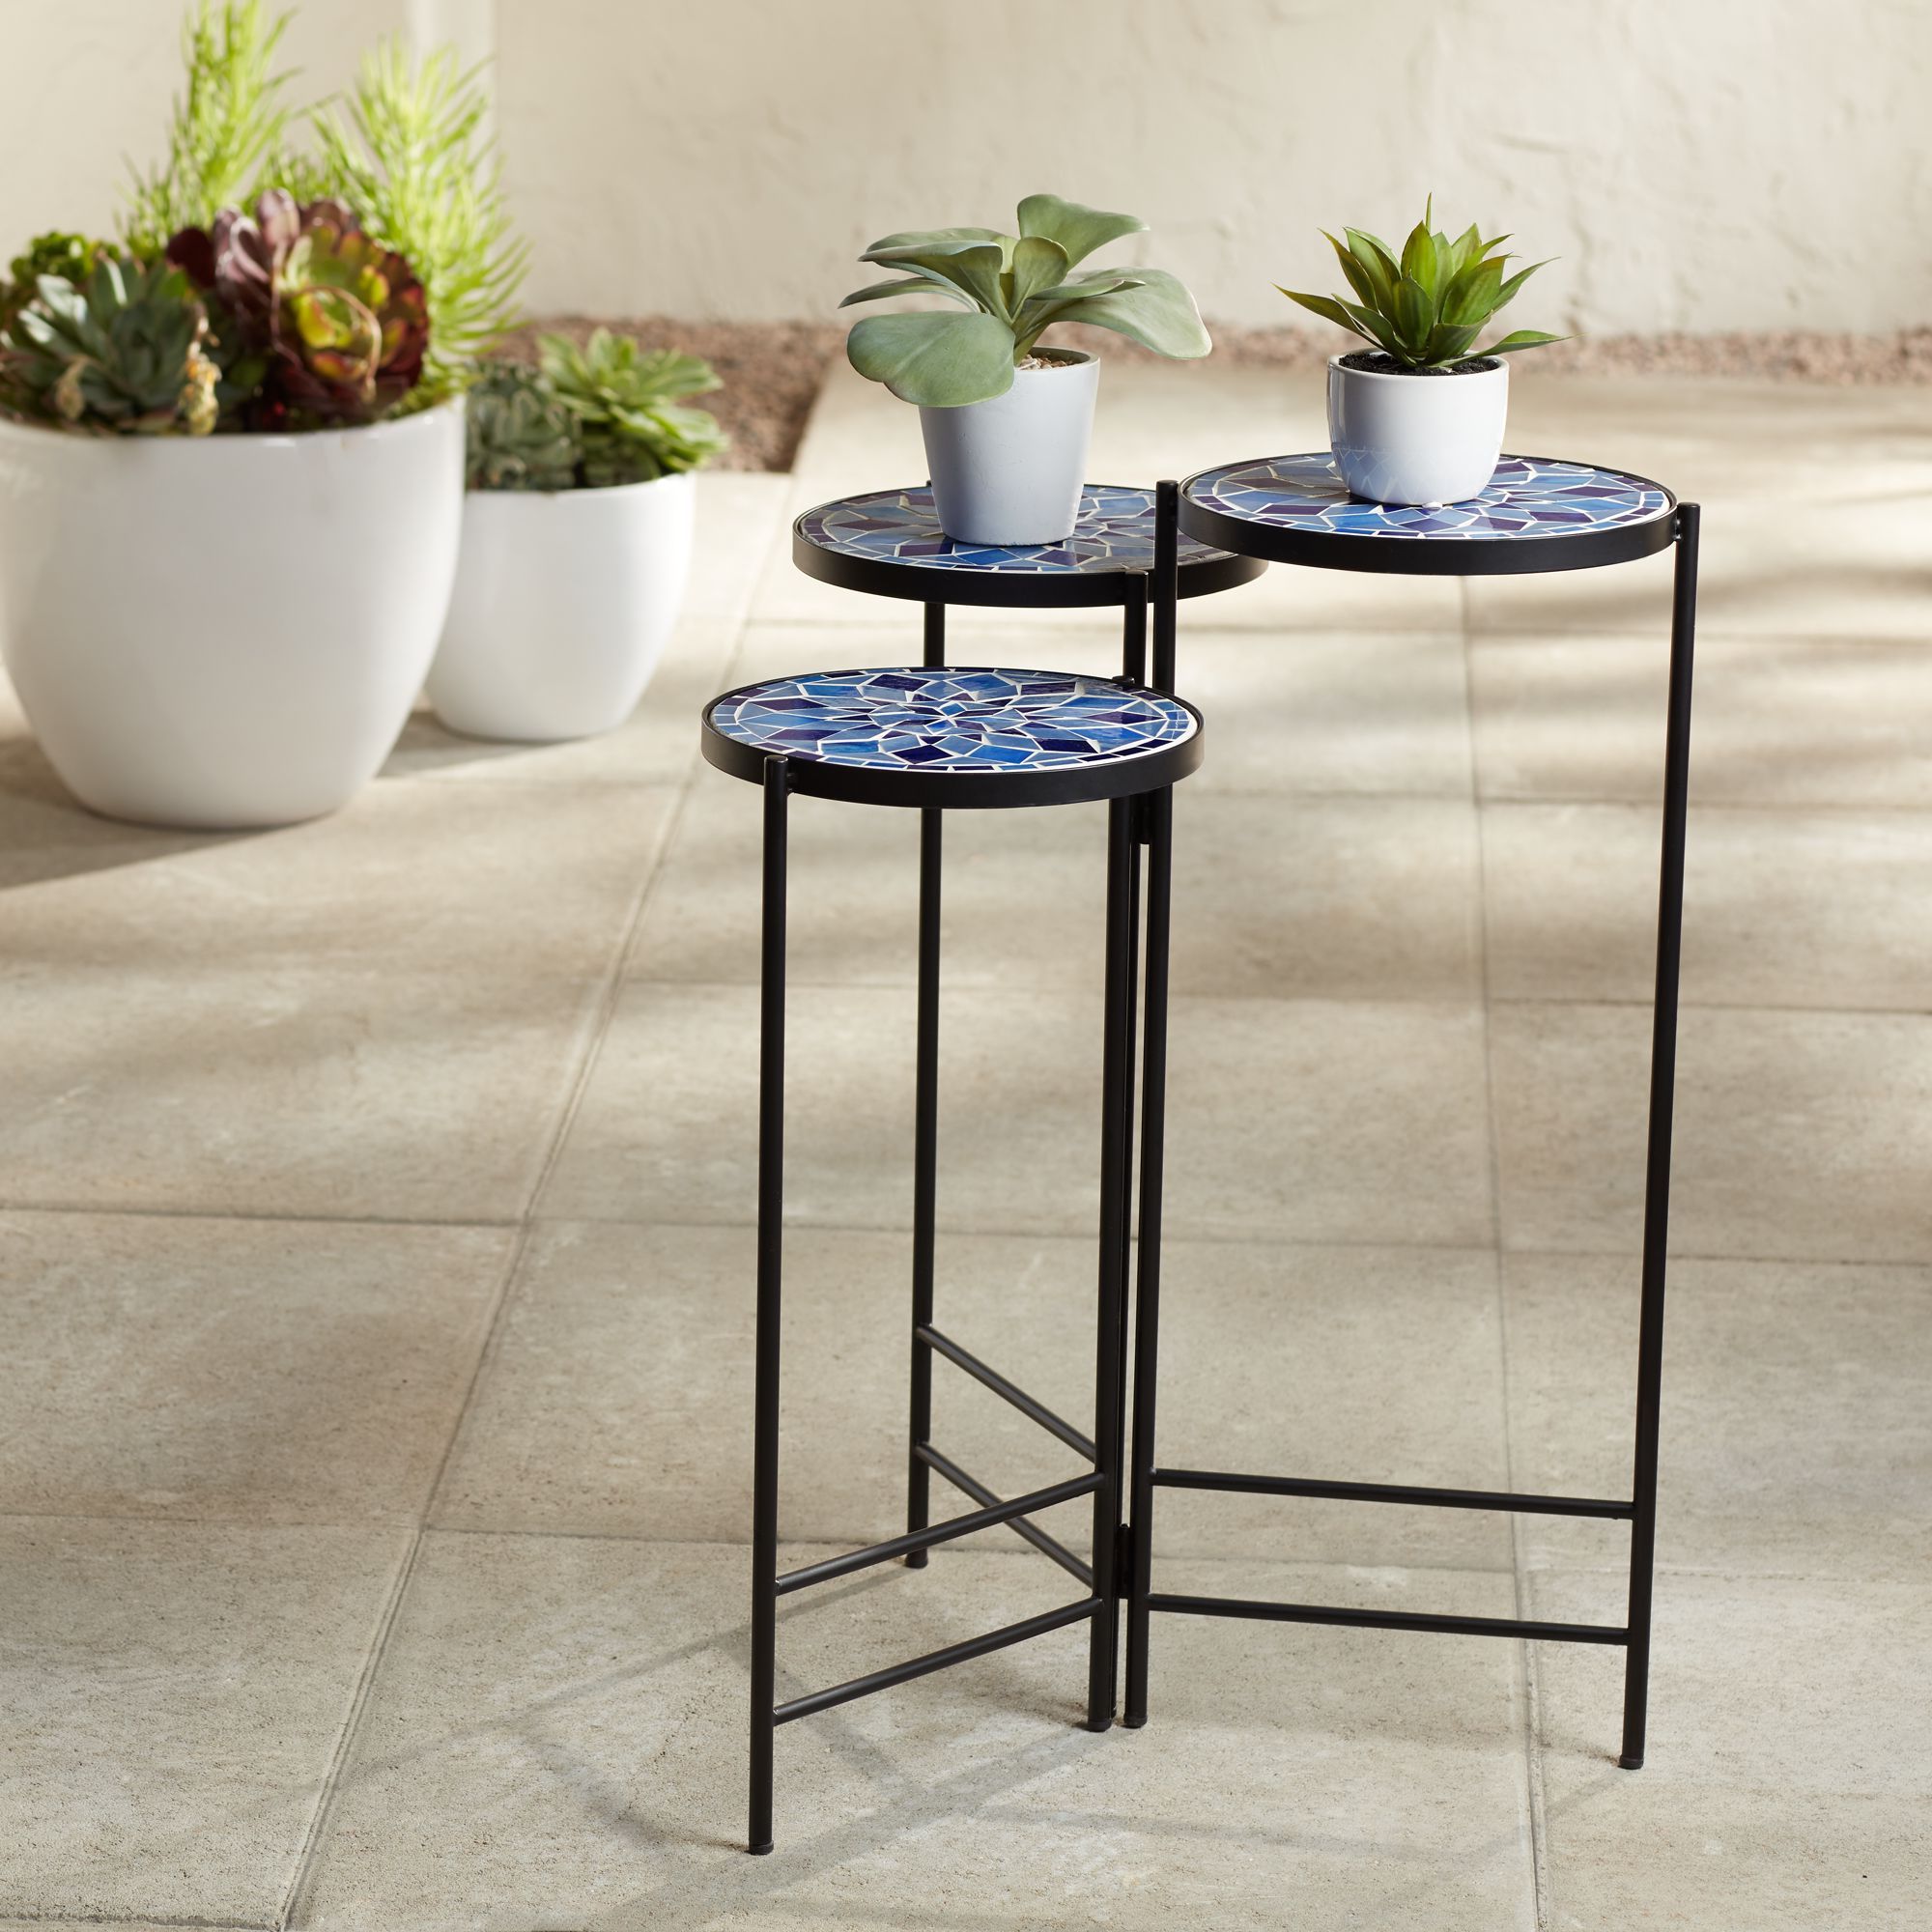 Current Teal Island Designs Blue Mosaic Black Iron Set Of 3 Accent Tables With Regard To Mosaic Black Iron Outdoor Accent Tables (View 8 of 15)